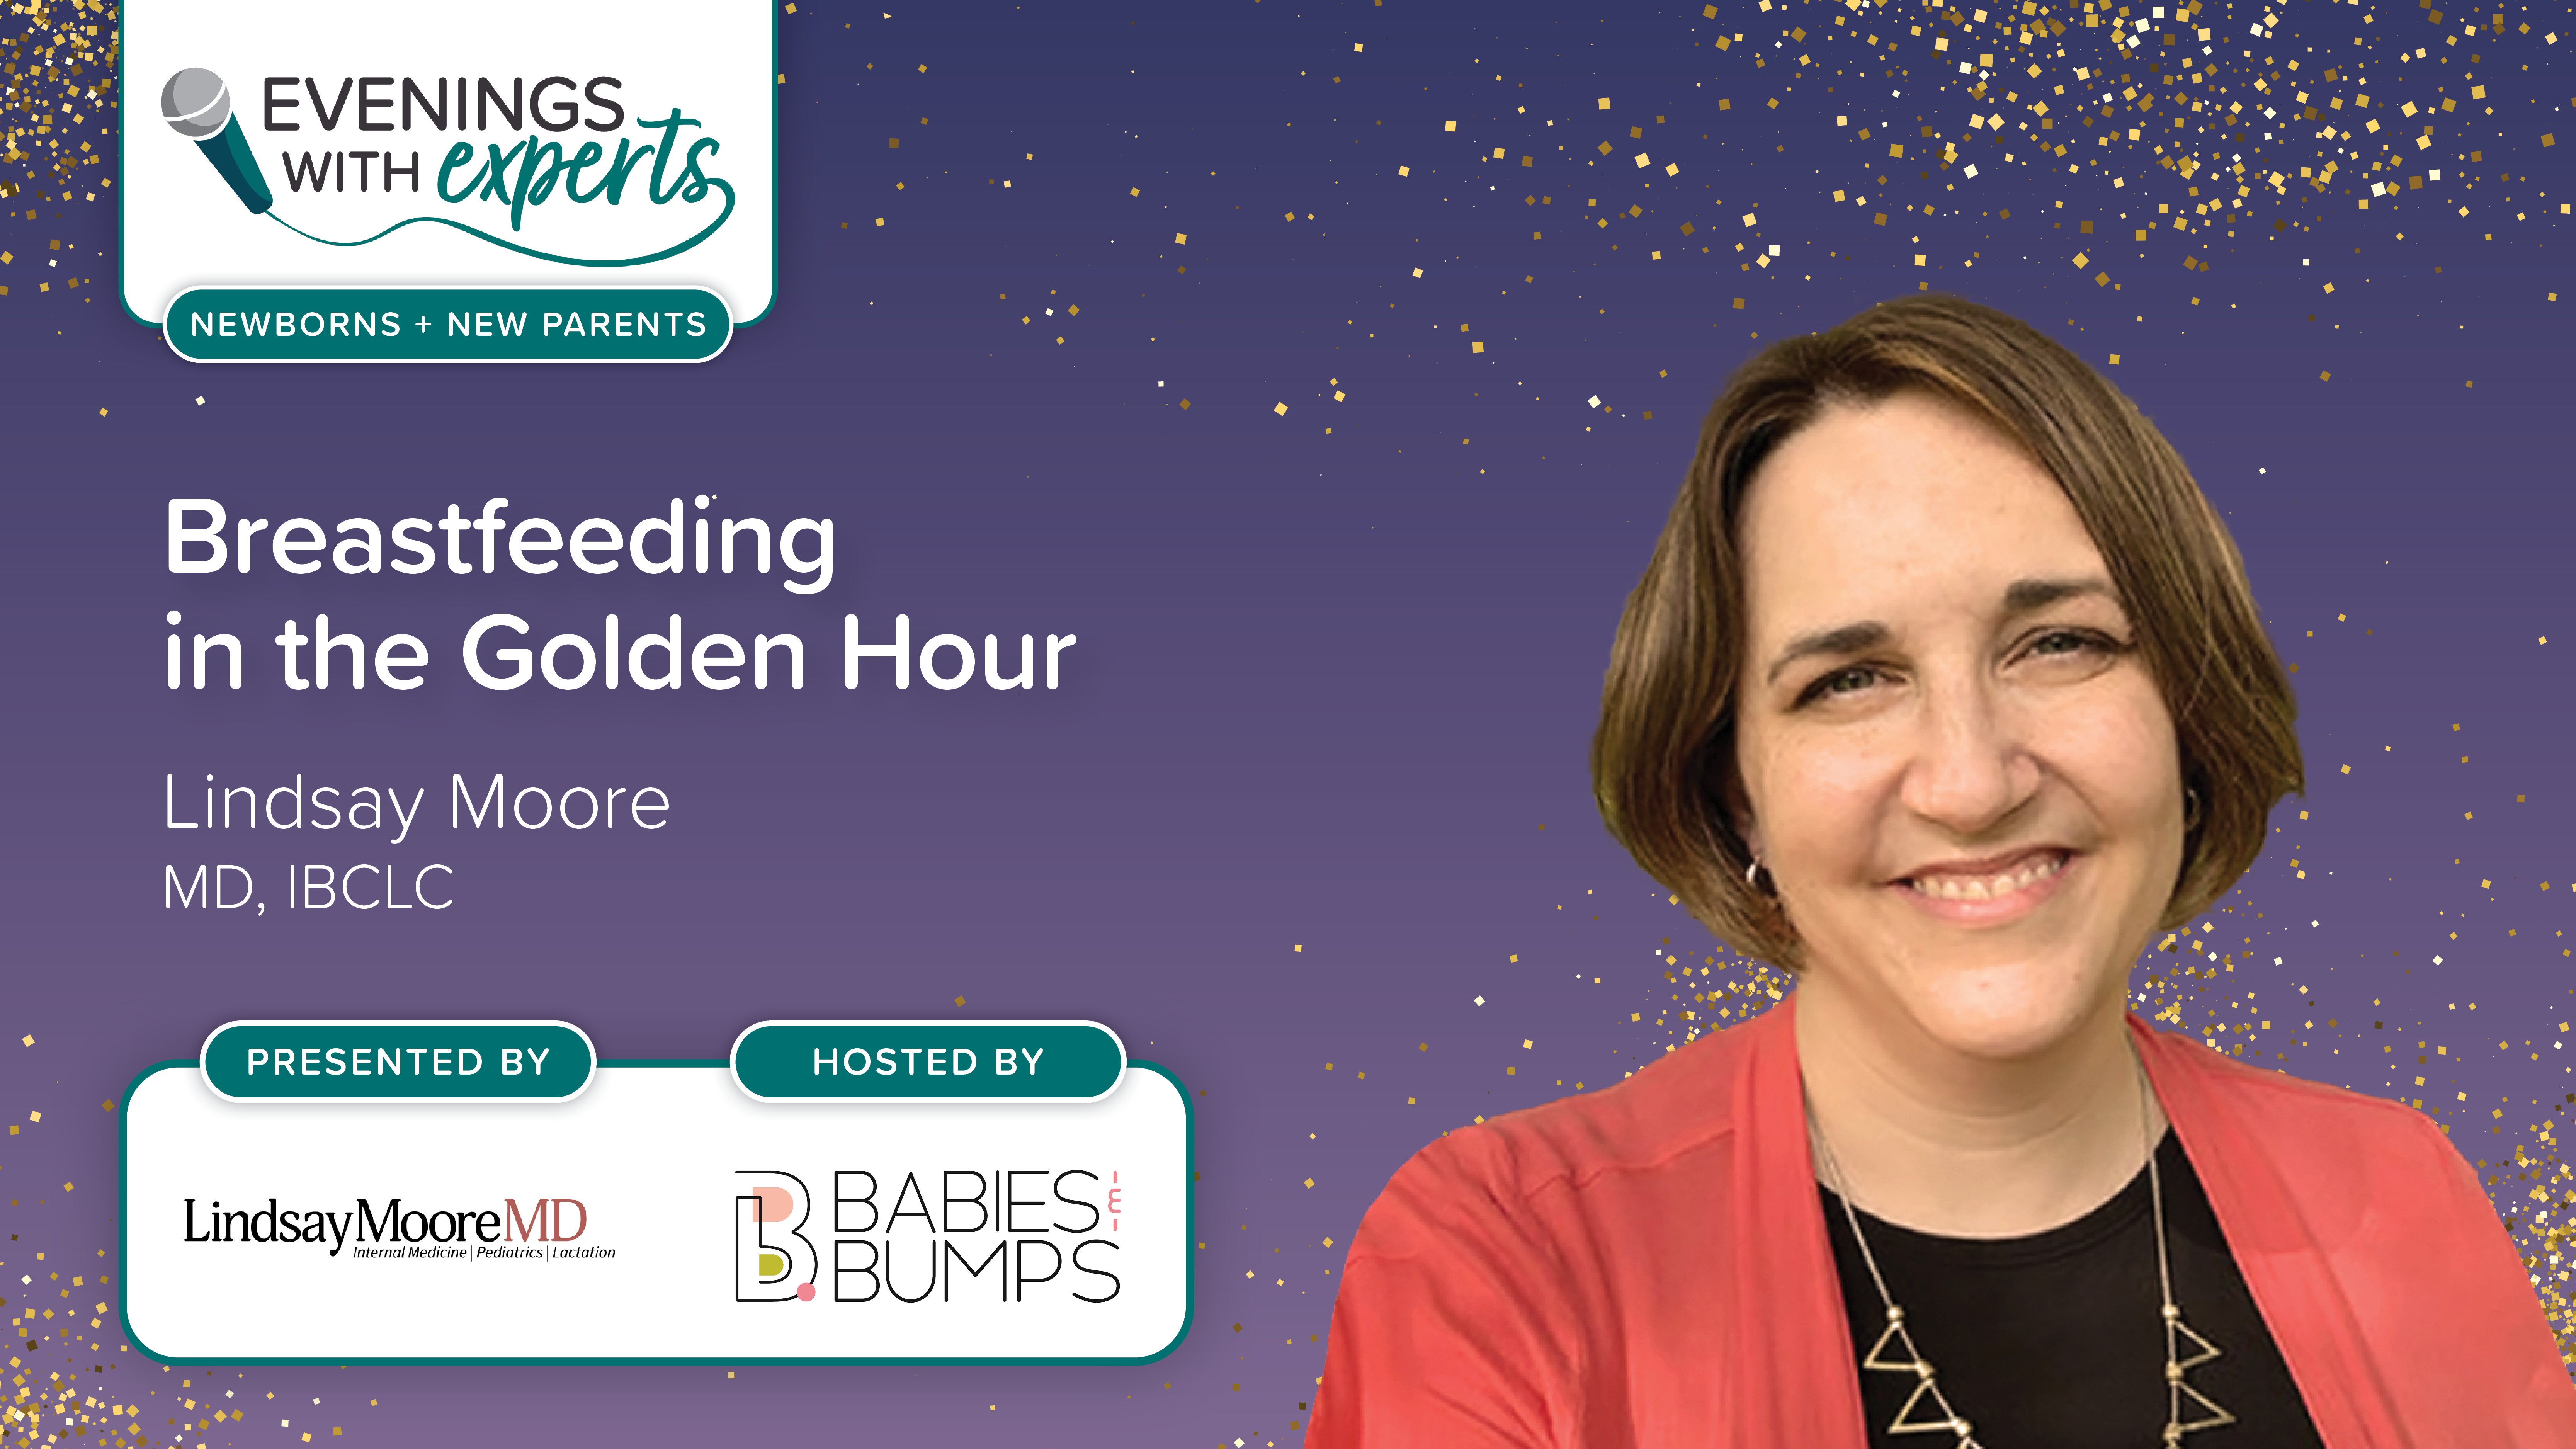 Evenings with Experts: Breastfeeding in the Golden featuring Lindsay Moore, MD, IBCLC. Presented by Dr. Lindsay Moore. Hosted by Babies & Bumps.